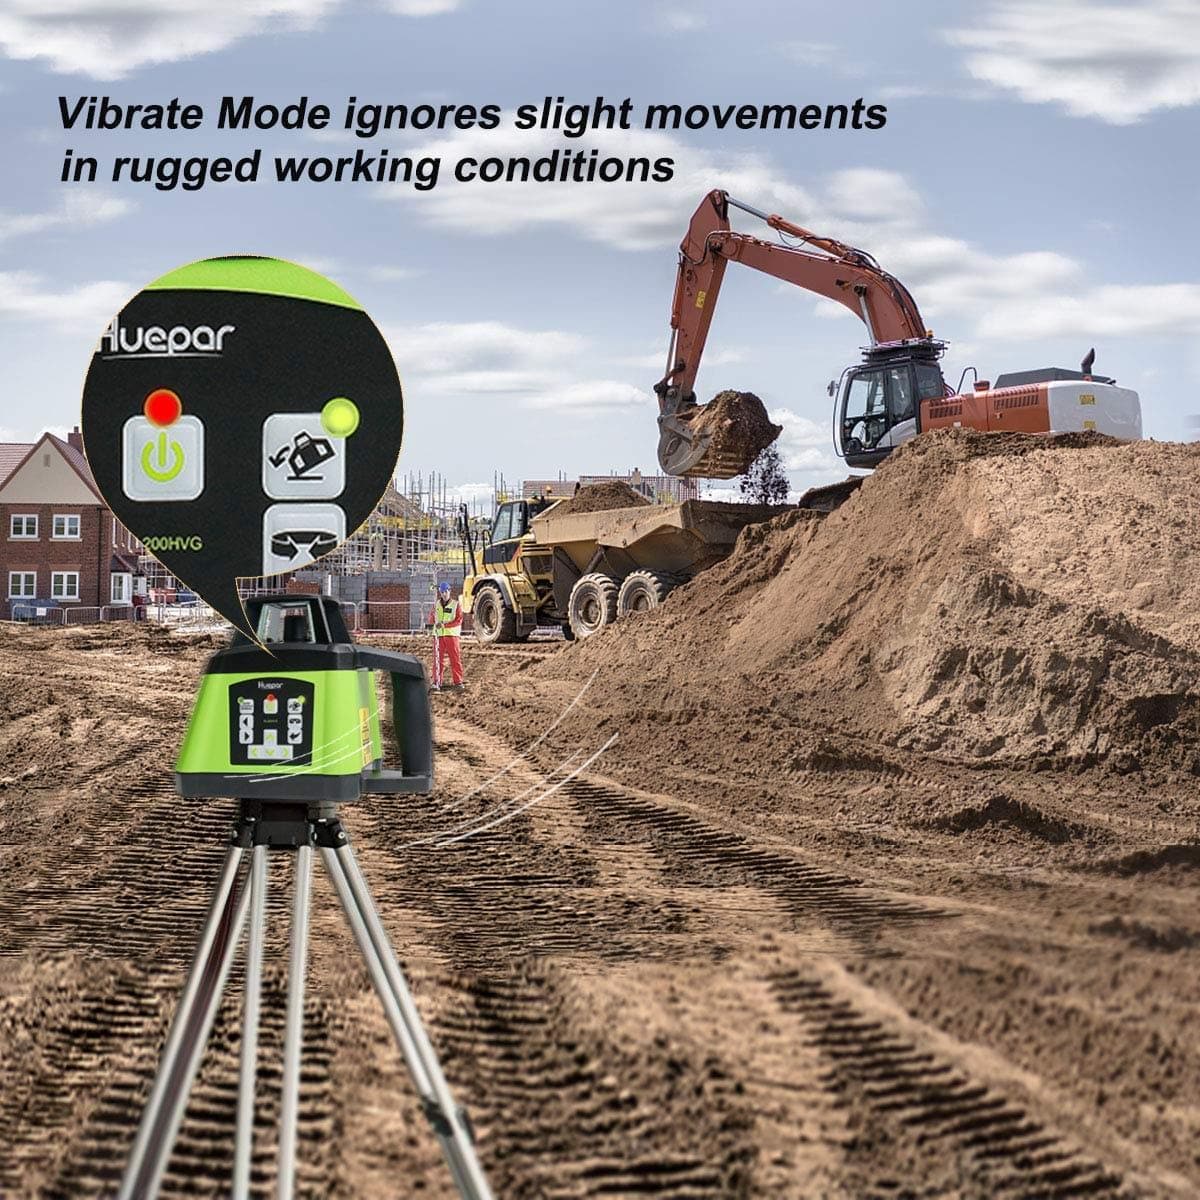 Rotary Laser Level For Grading And Landscaping: Our Top 5